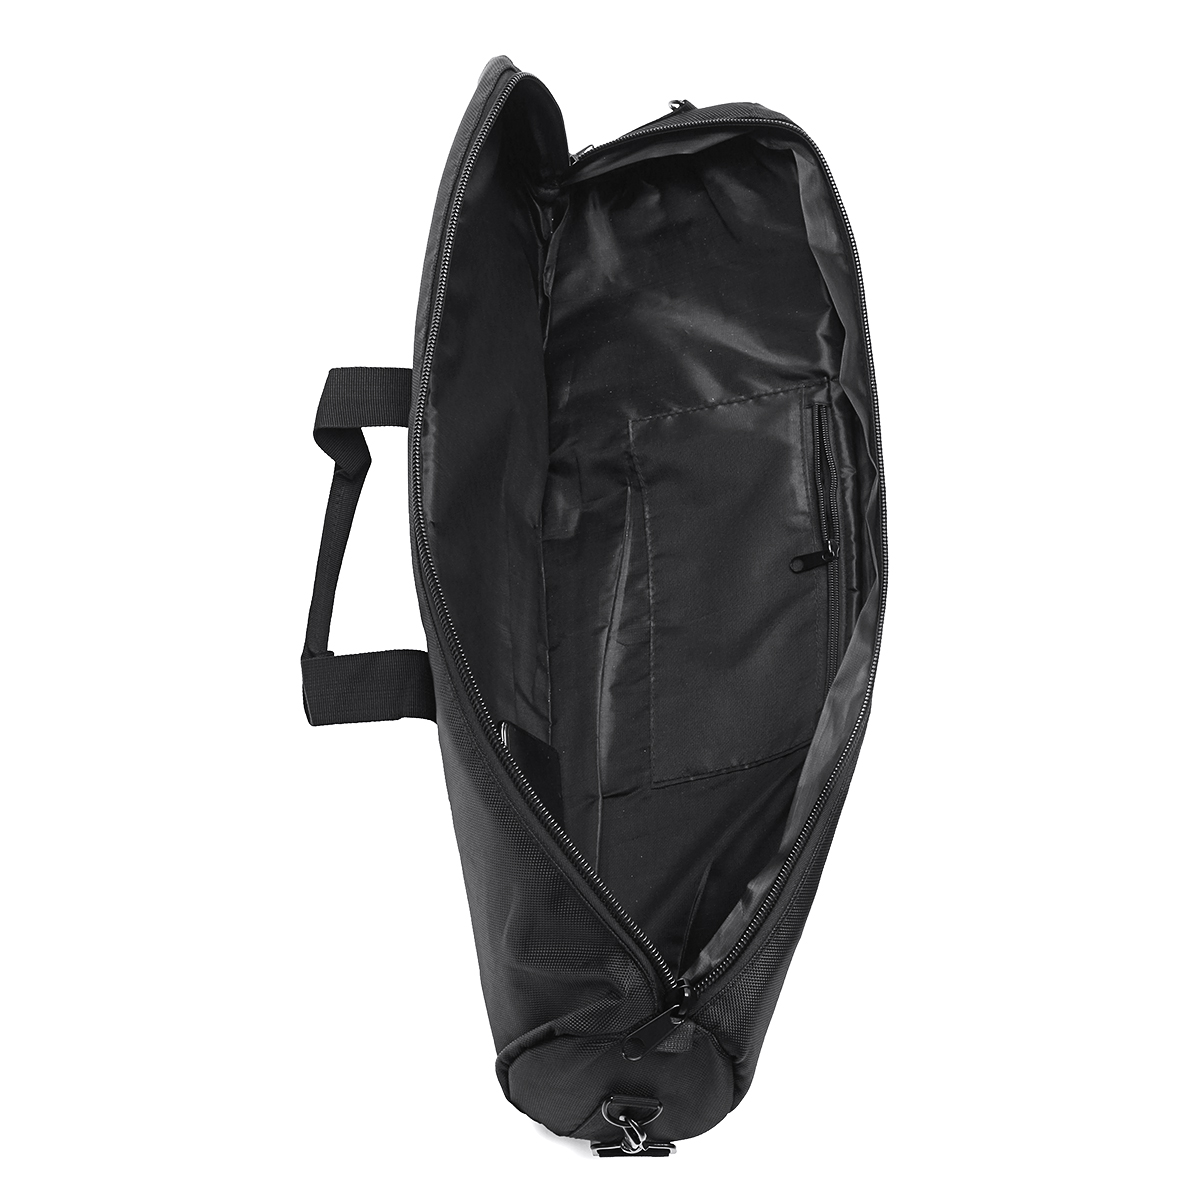 607080cm-Camera-Tripod-Storage-Bag-Travel-Carry-Case-Photography-Accessories-1526351-2